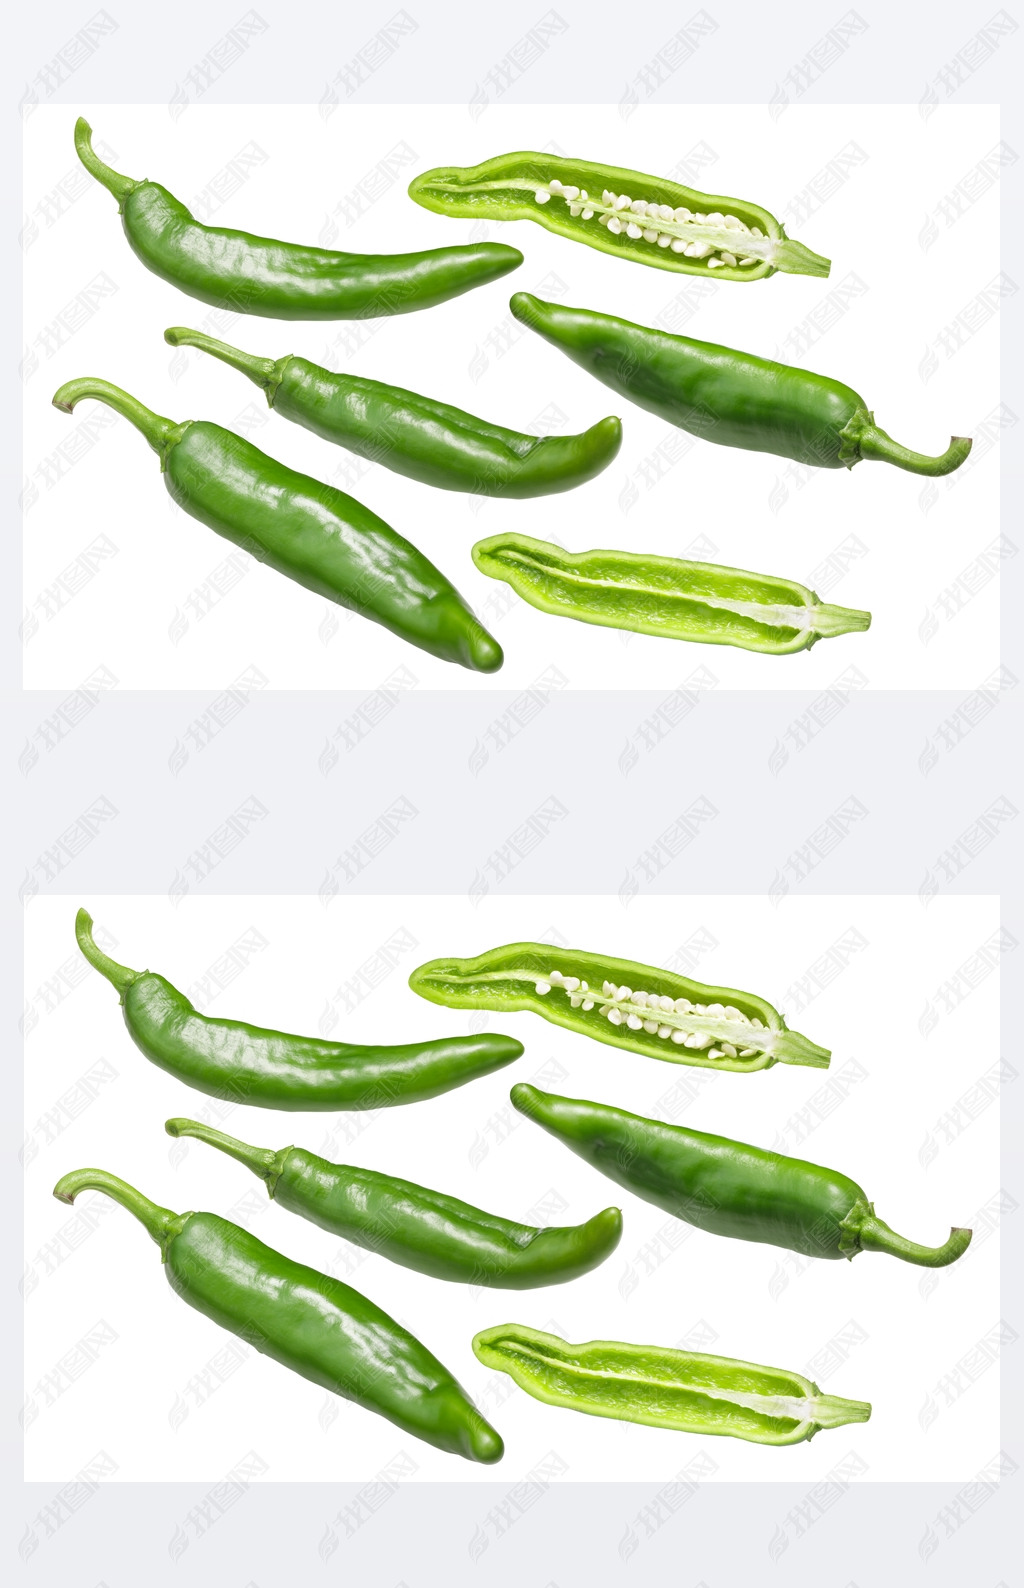 Lumbre green chile peppers